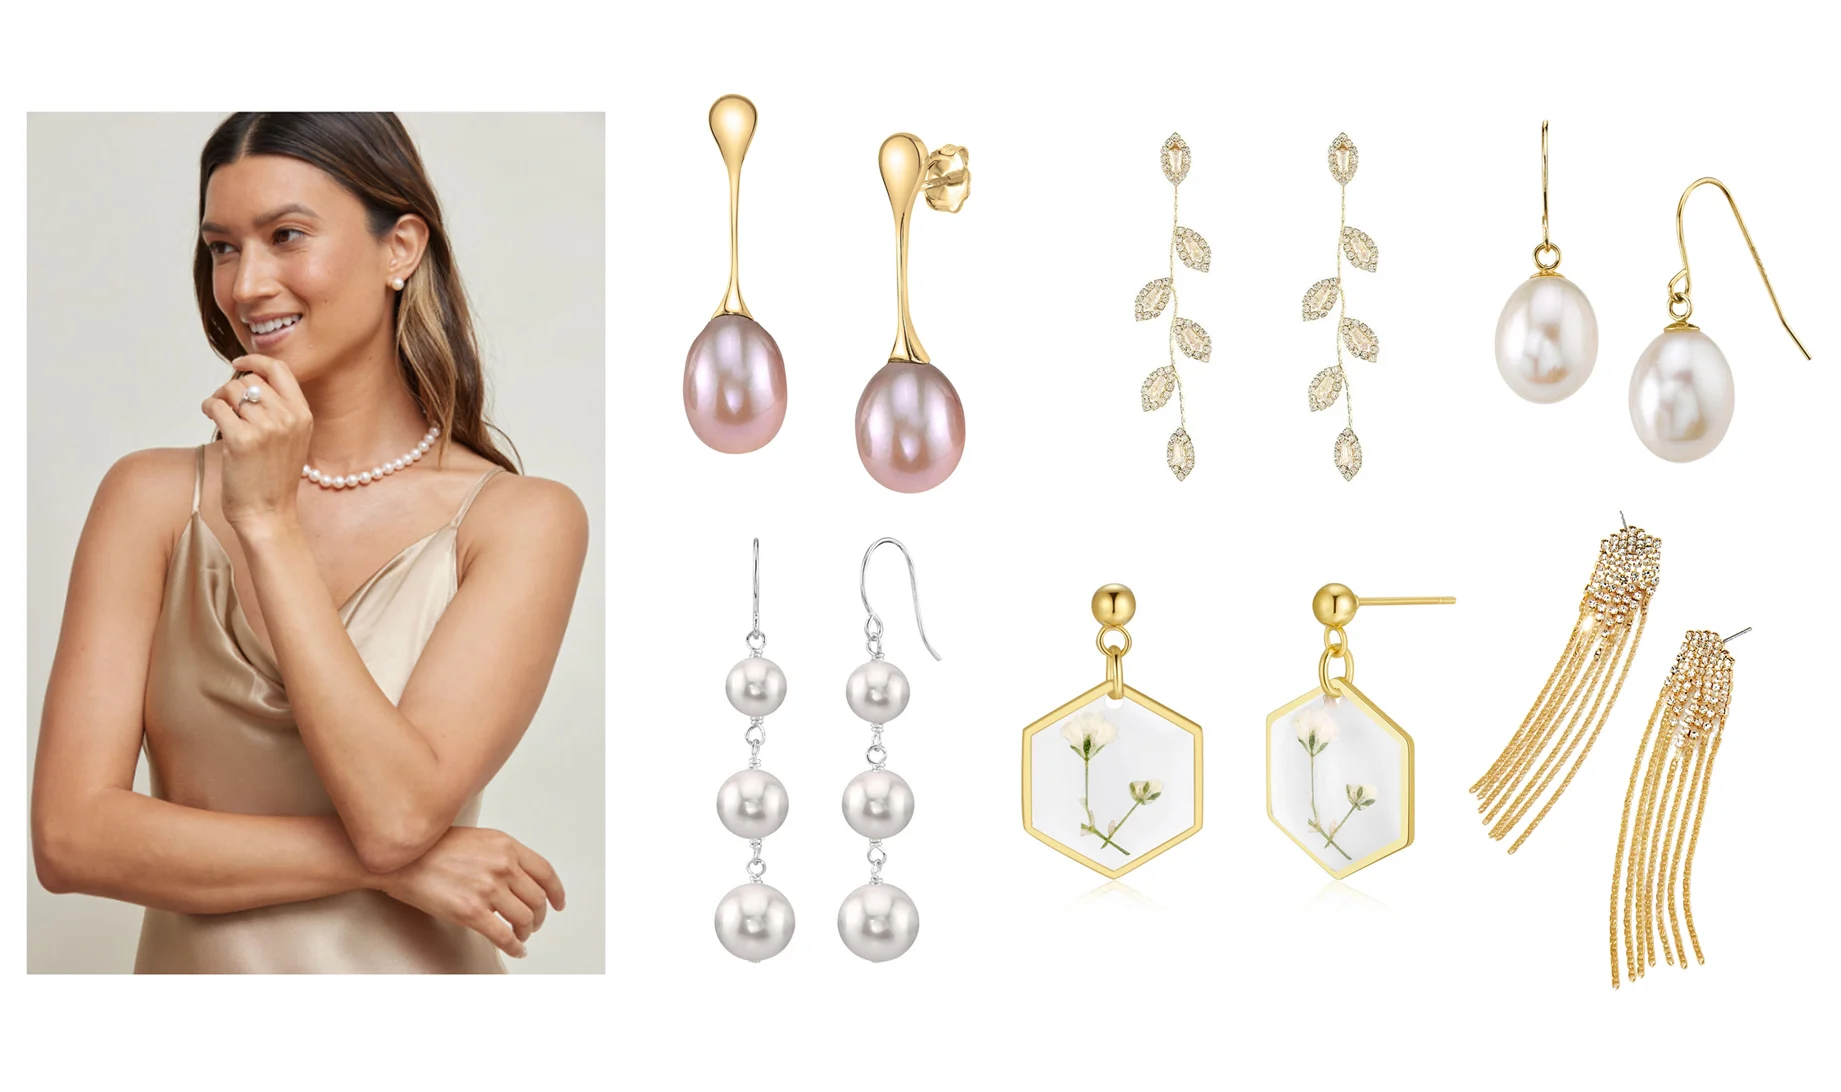 Bridesmaid Earrings Selection: Elevate the Moment